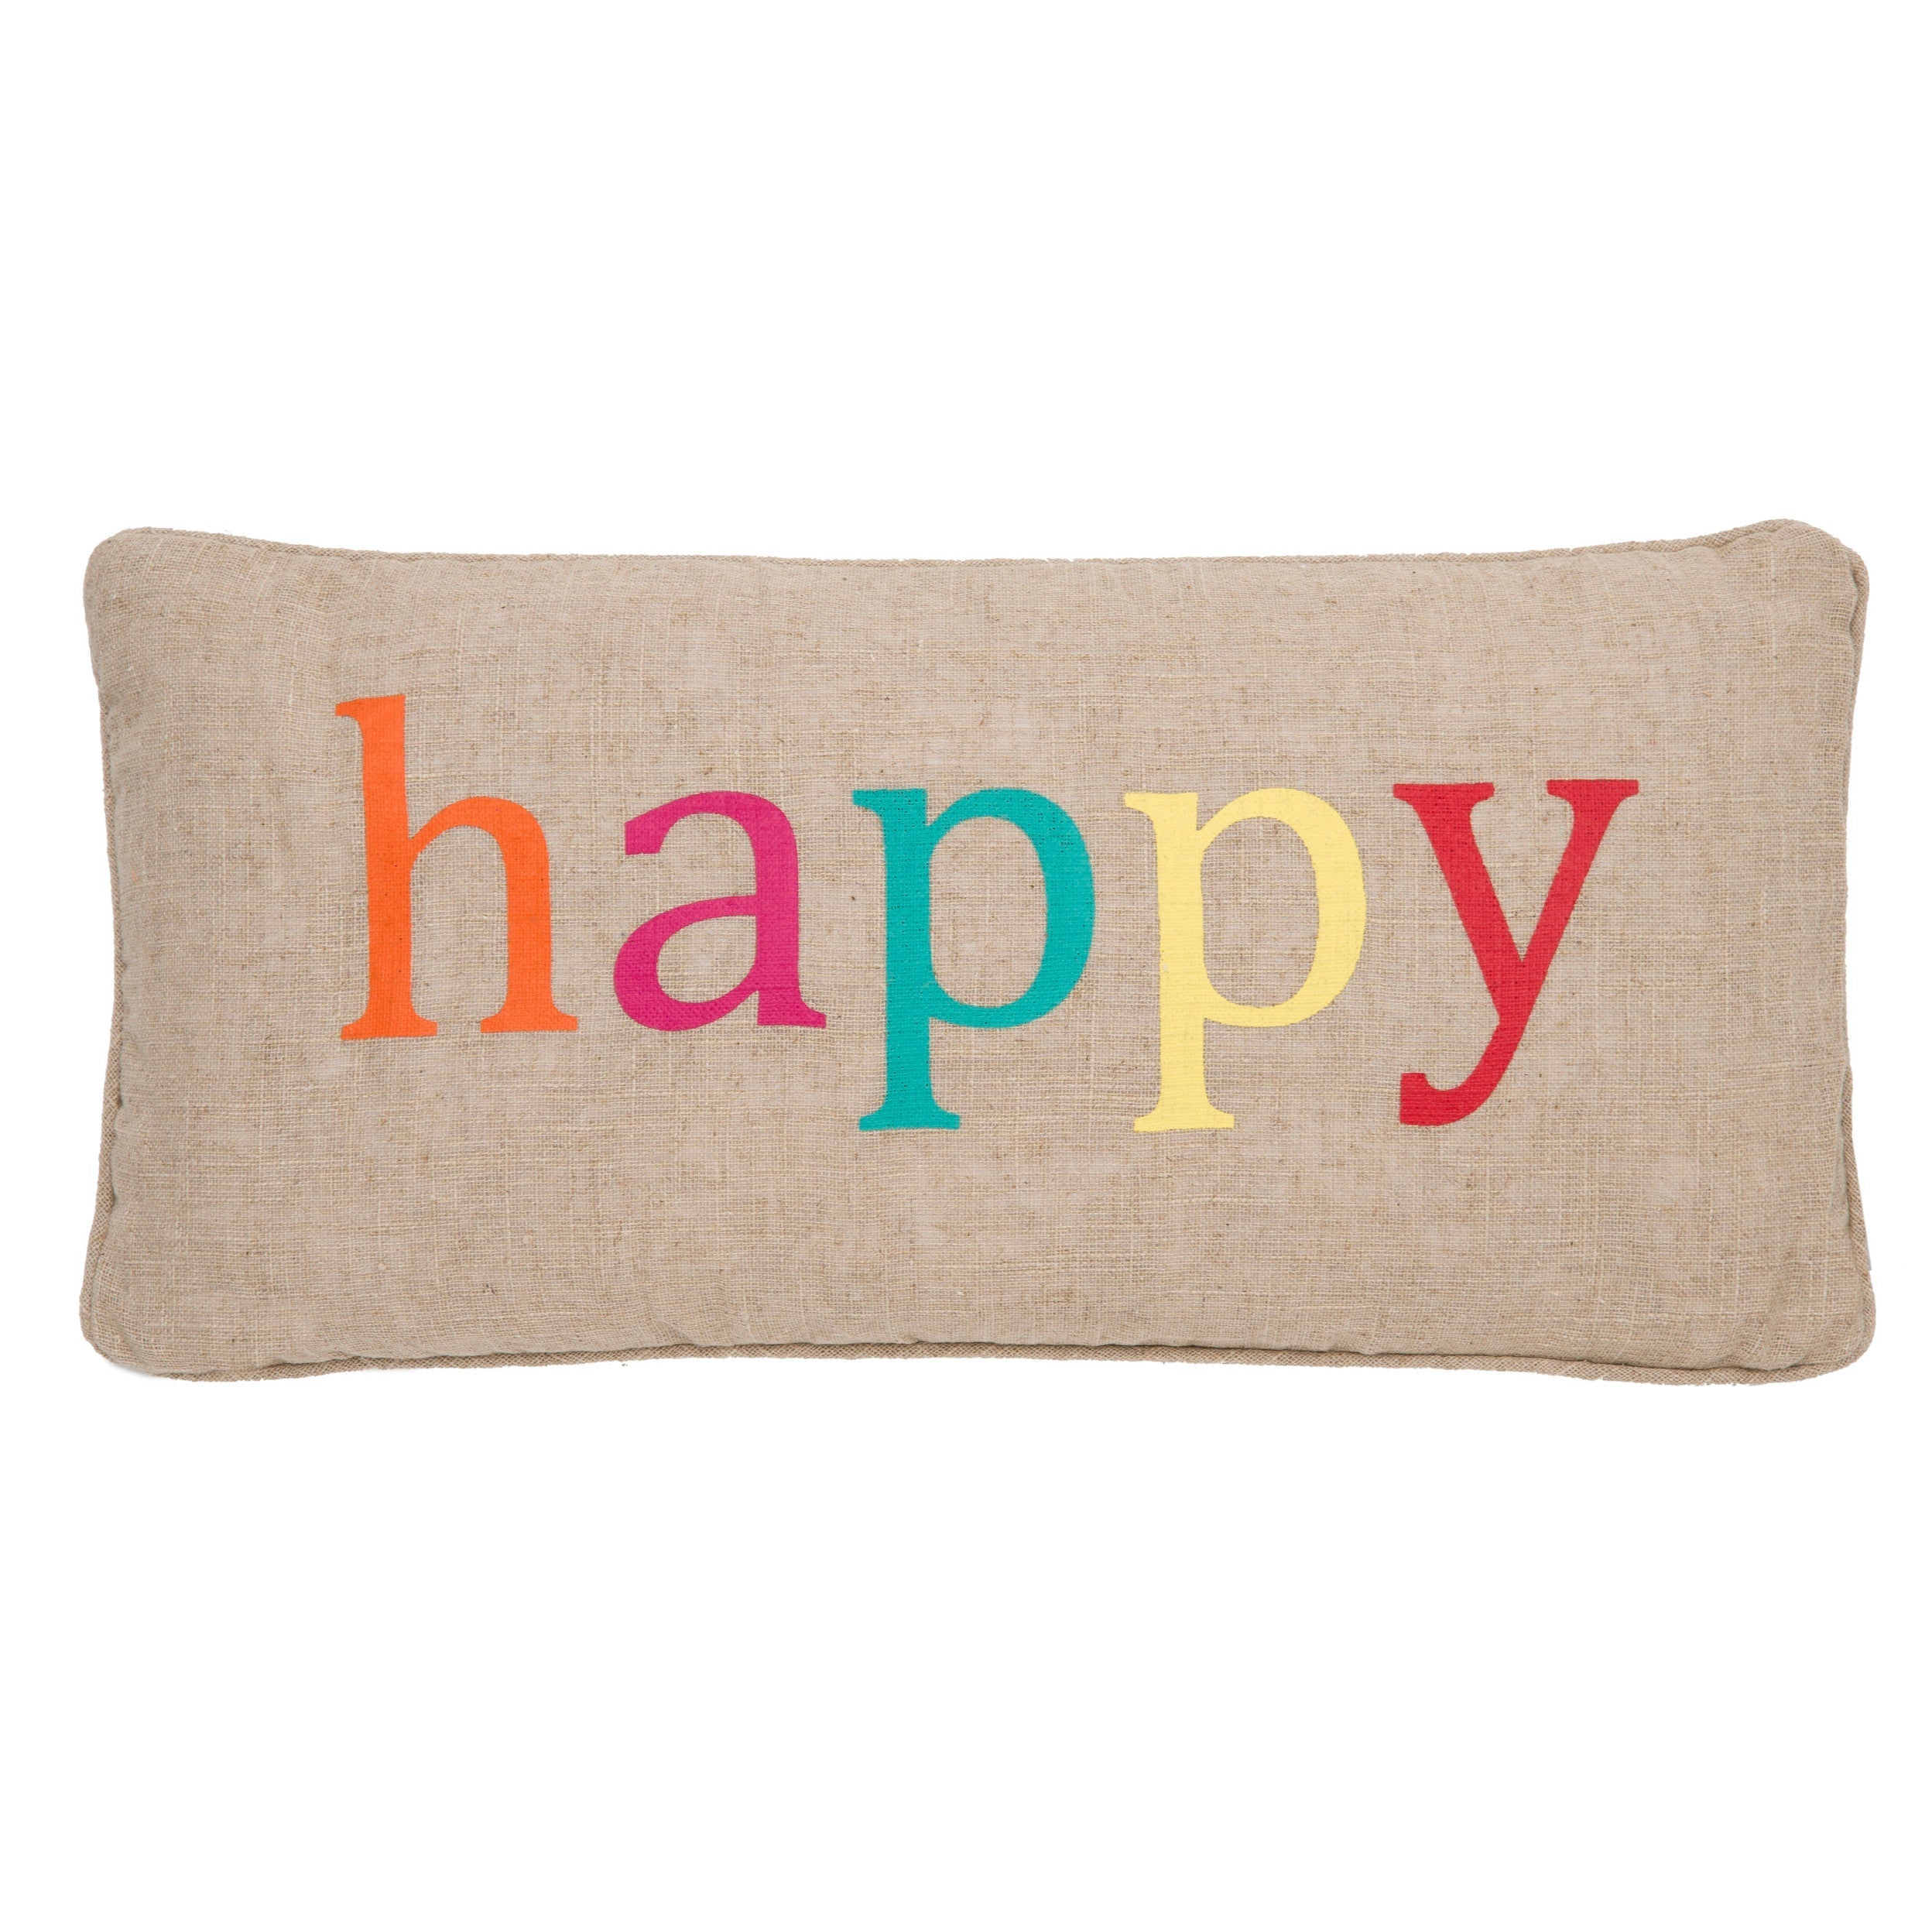 Ariana Happy Multcolored on Burlap Pillow